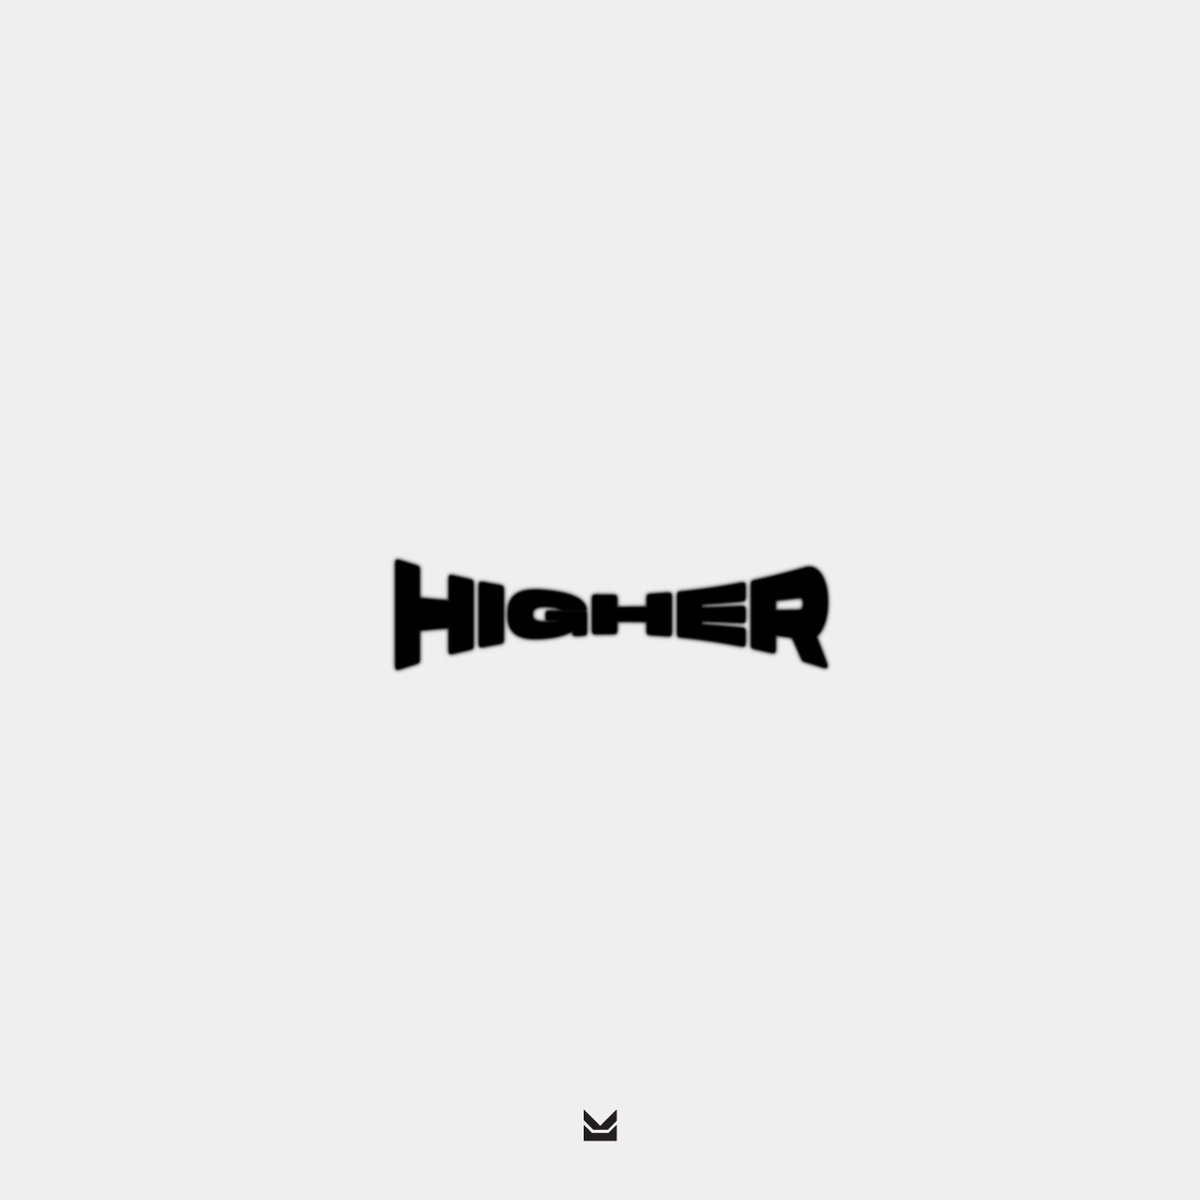 NEW SINGLE 'HIGHER' OUT NOW // capitalkings.lnk.to/higher